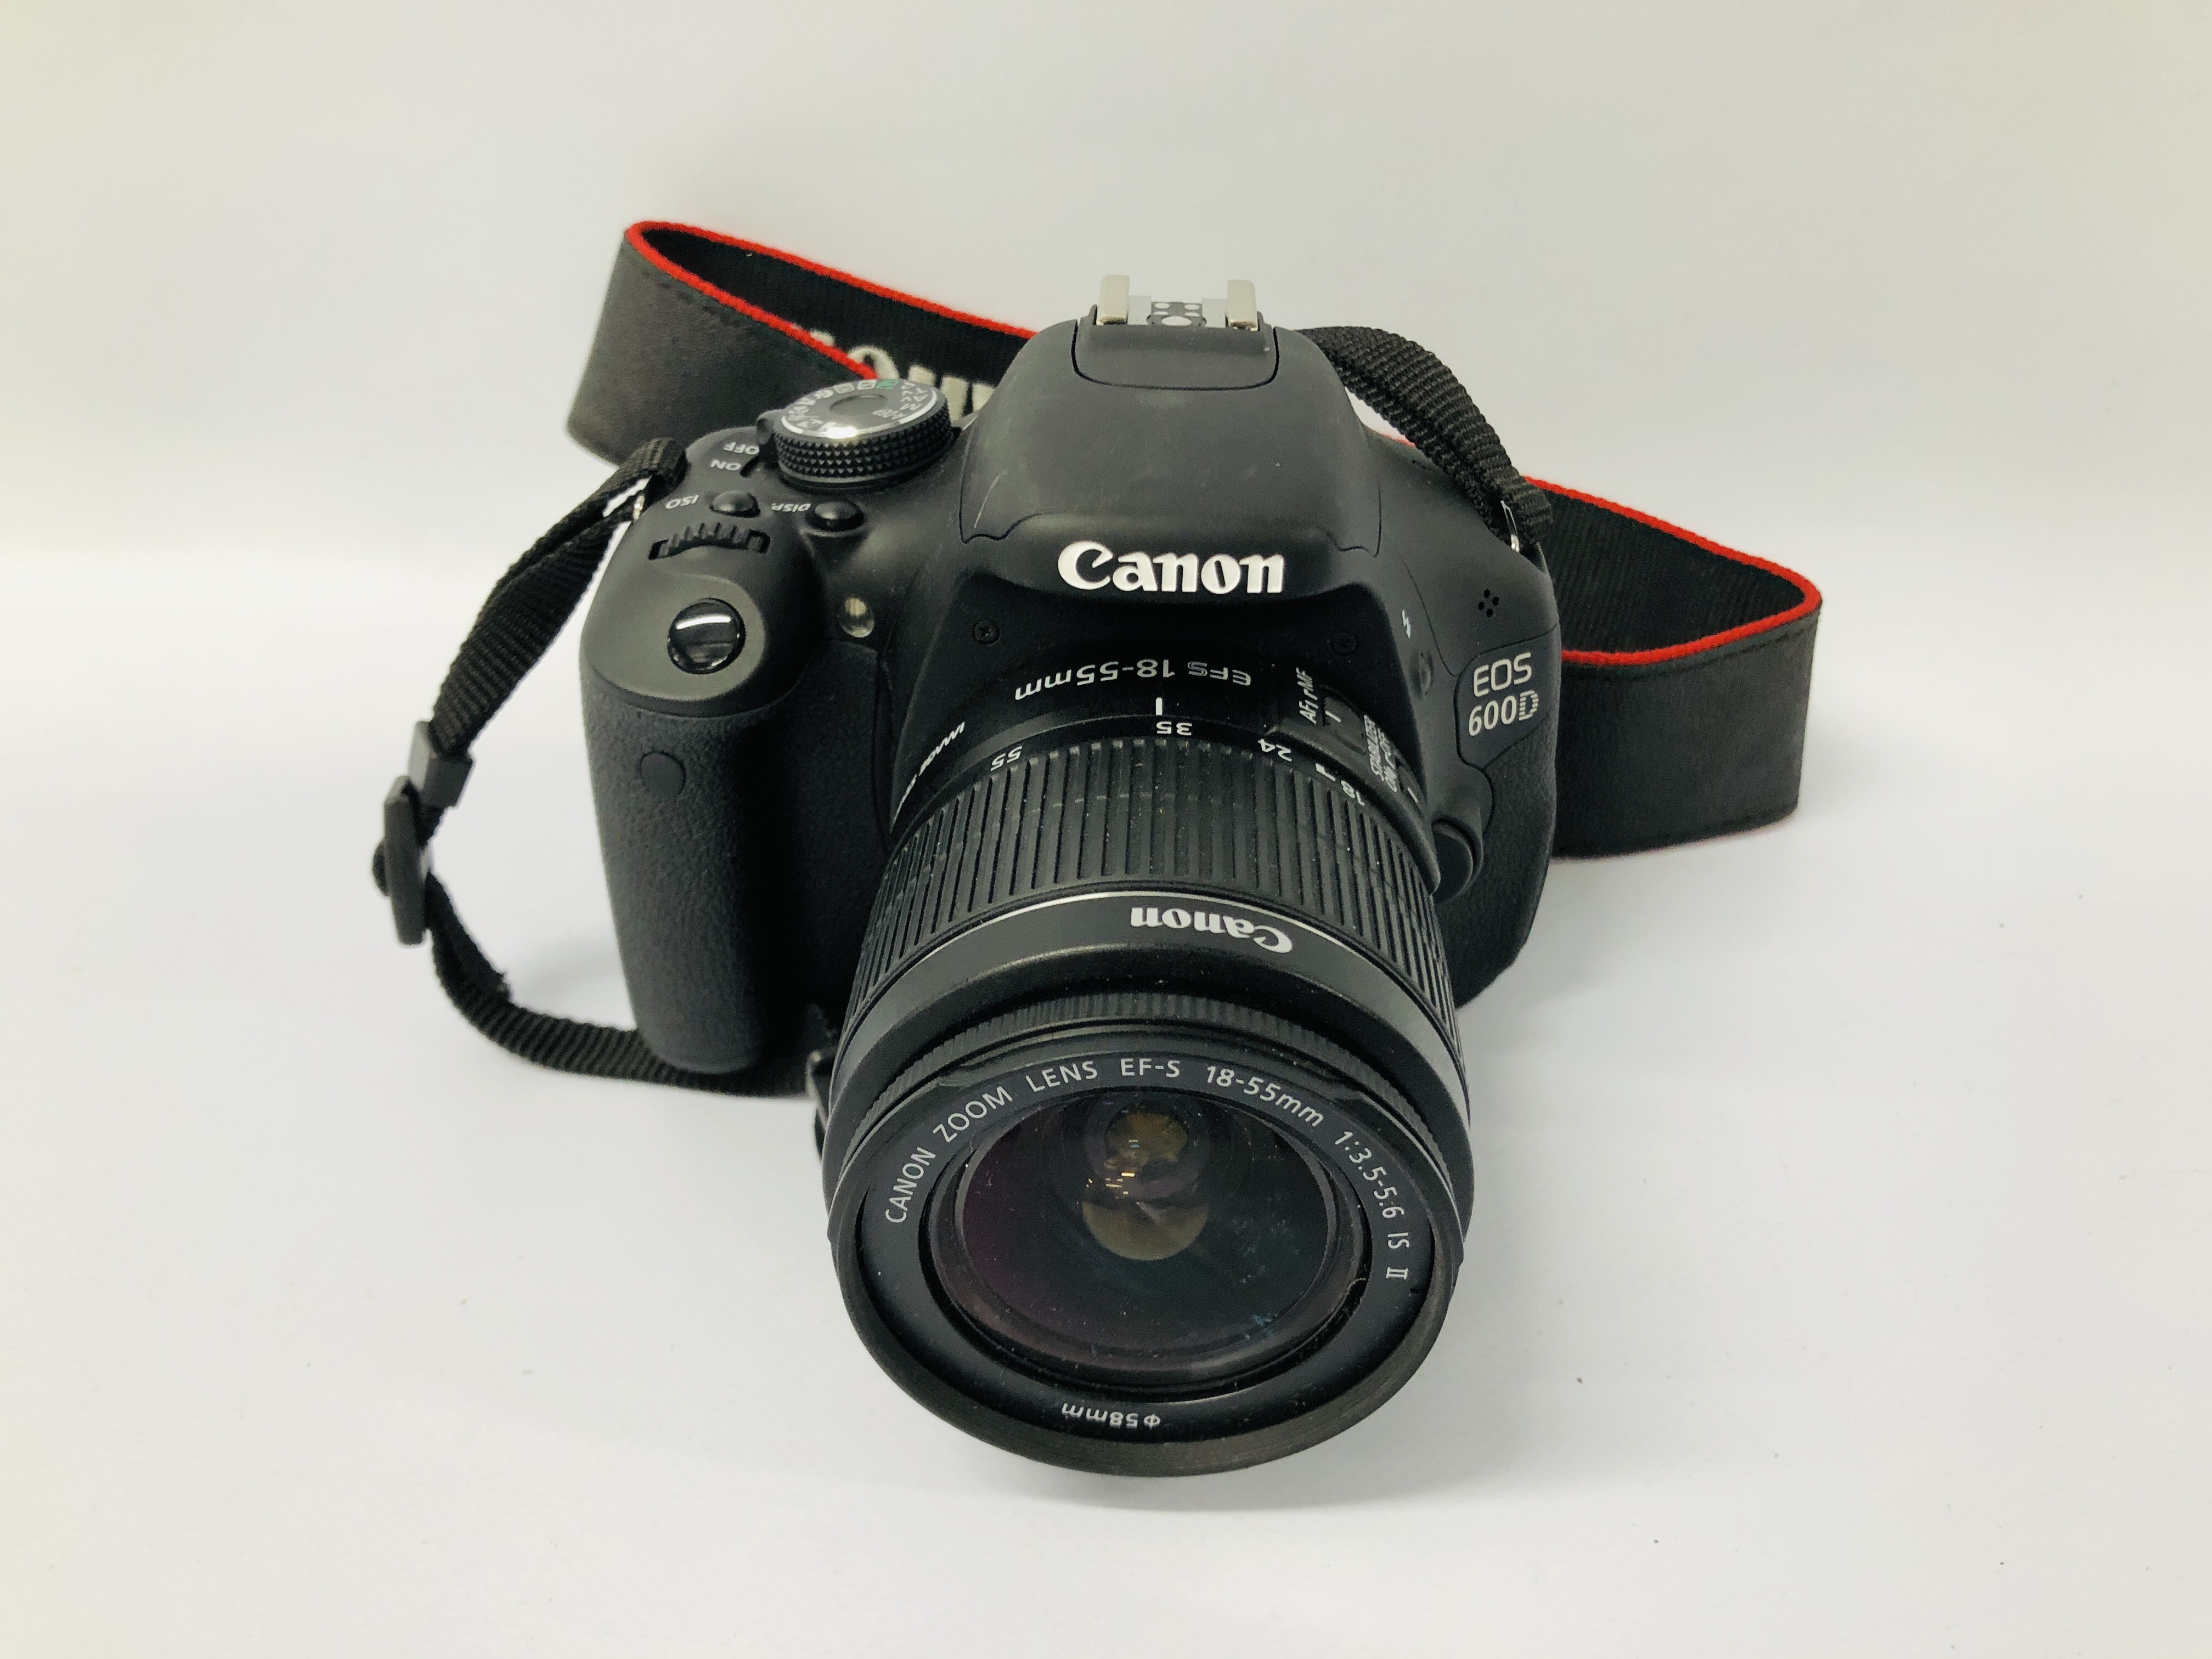 CANON EOS 600D DIGITAL SLR CAMERA BODY FITTED CANON EFS 18-55 MM LENS S/N 223076025193 - SOLD AS - Image 2 of 6